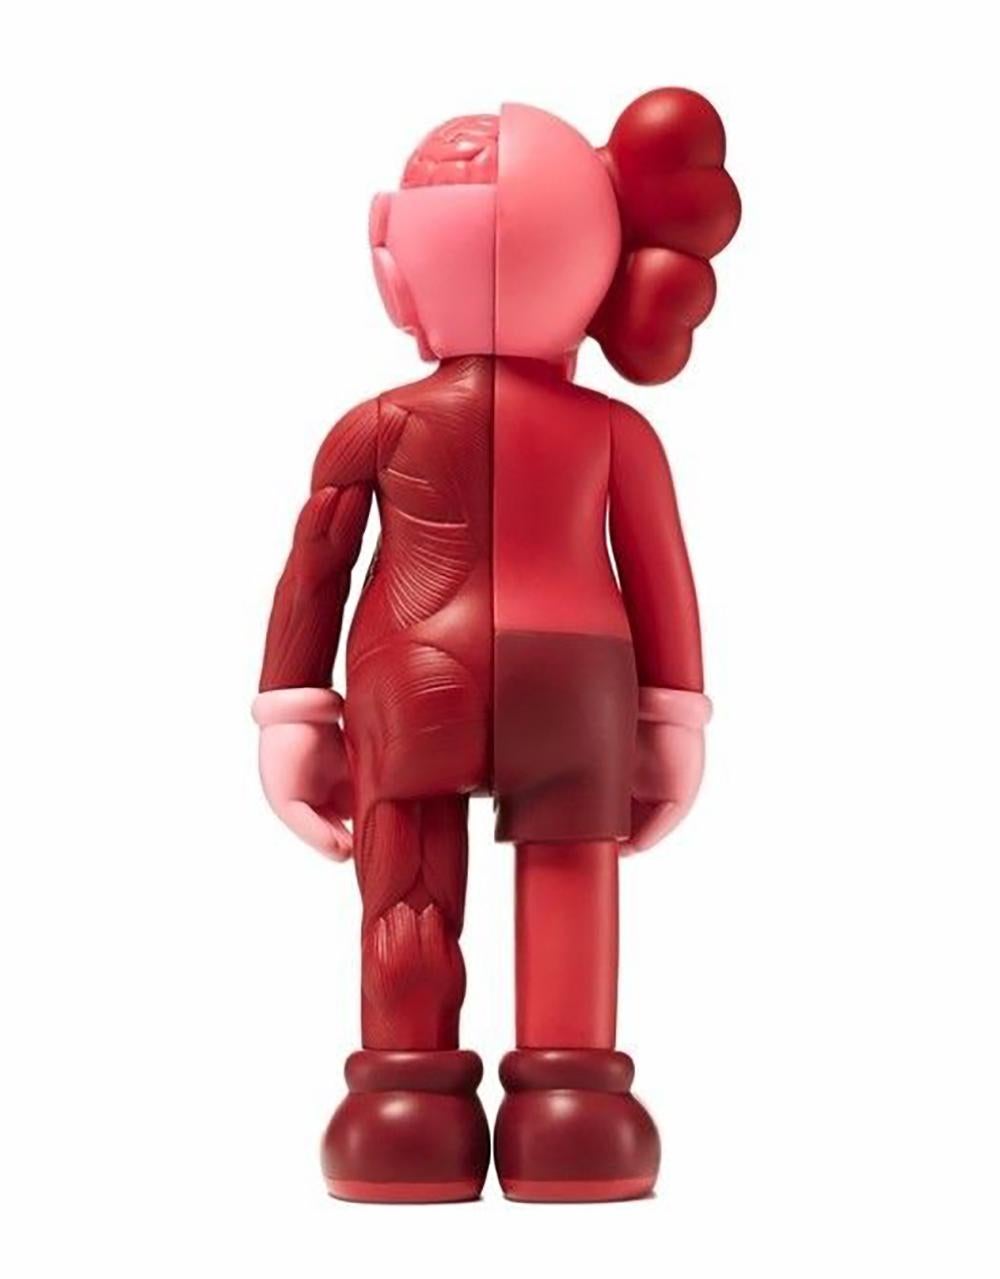 KAWS - Set of 2 Companion Blush (Flayed) and Companion Blush- Painted Cast Vinyl For Sale 3